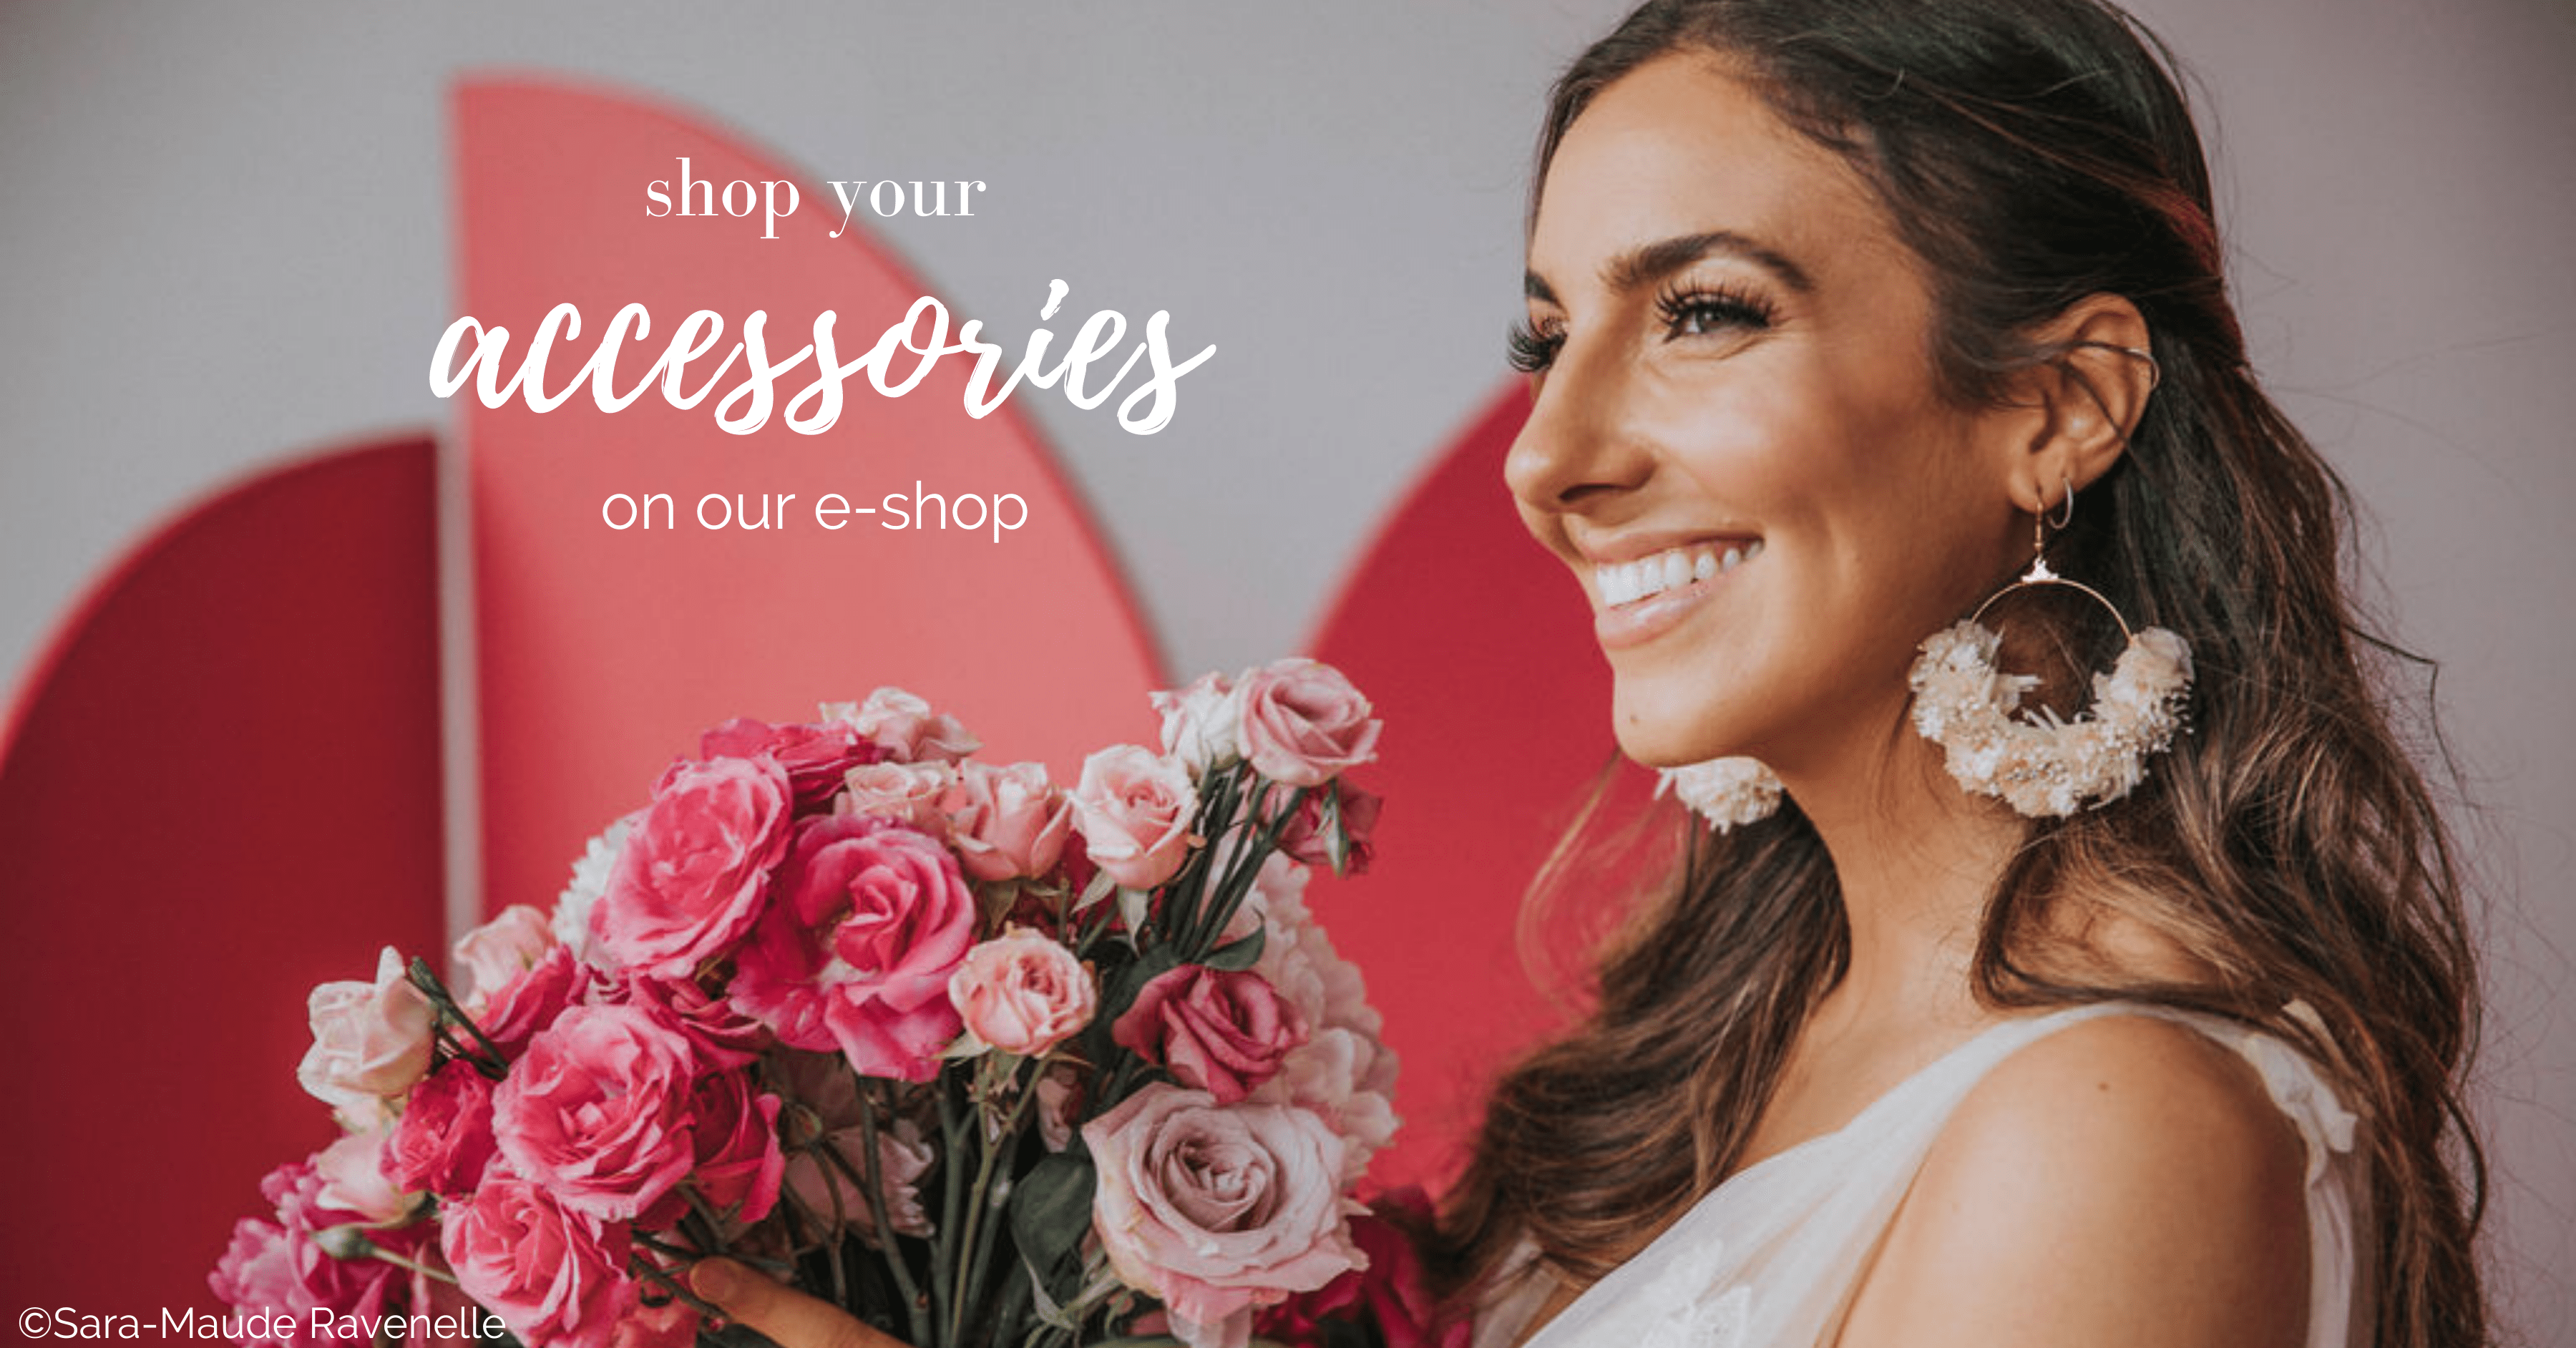 Shop your accessories on our e-shop - Dream It Yourself